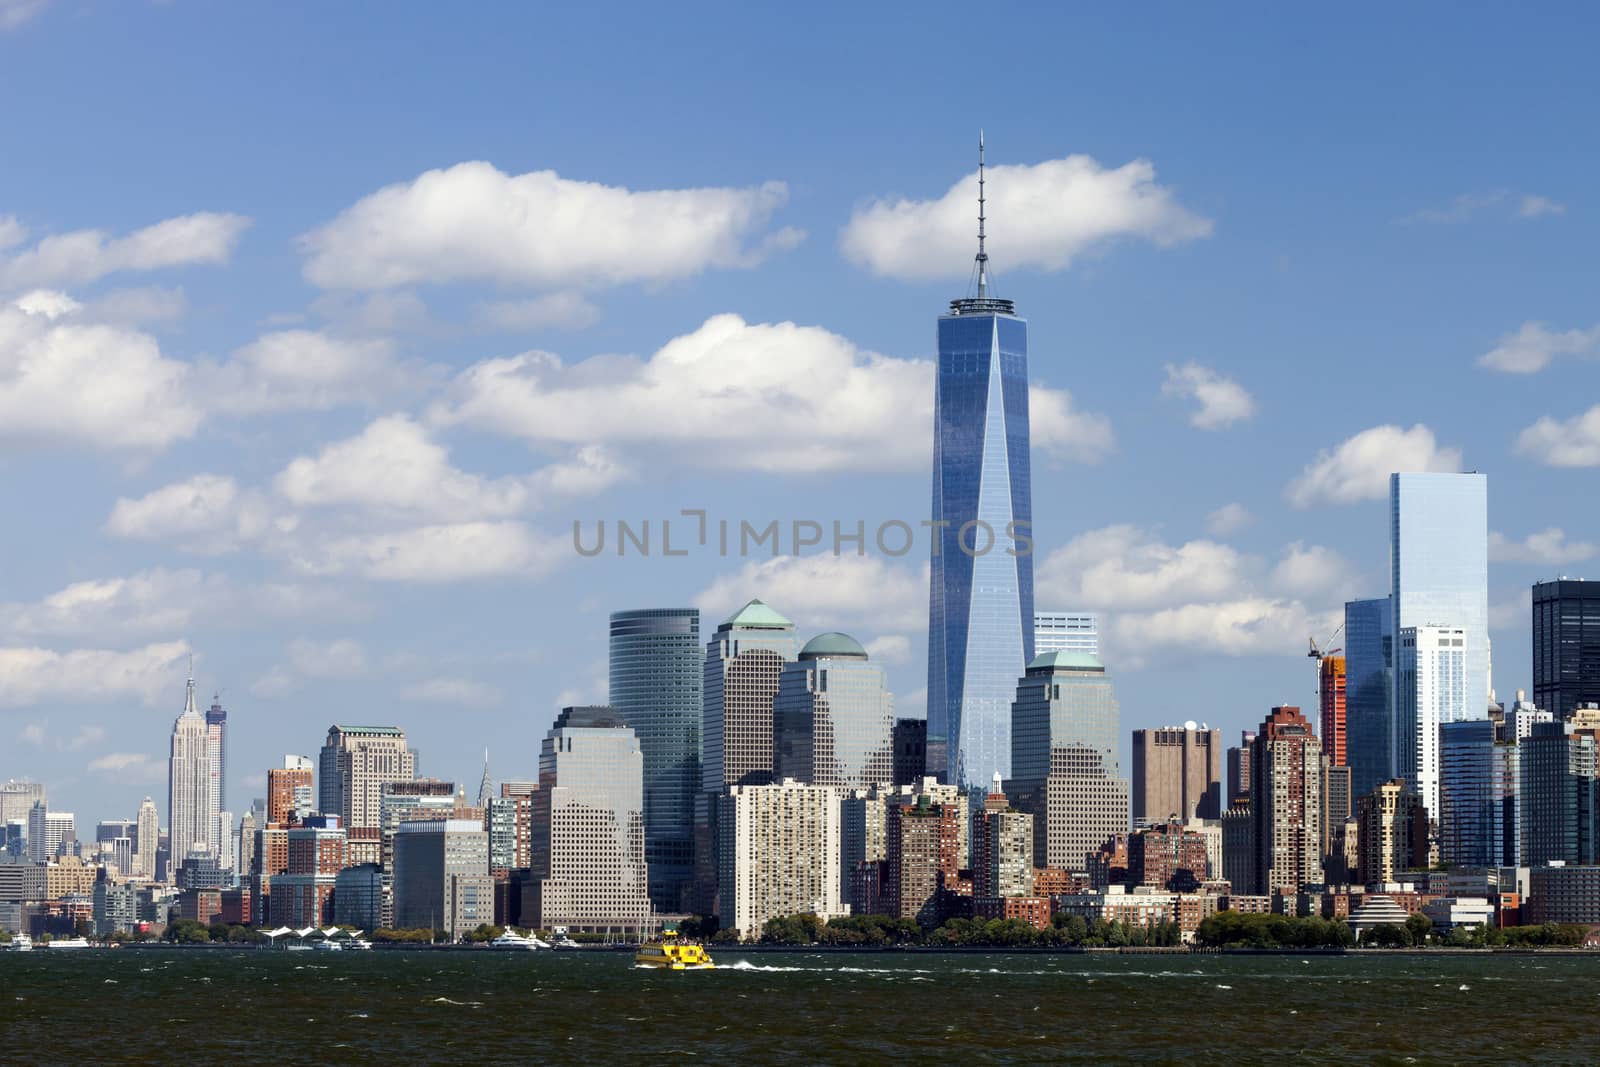 NEW YORK - OCTOBER 6: Freedom Tower in Lower Manhattan on October 6, 2014. One World Trade Center is the tallest building in the Western Hemisphere and the third-tallest building in the world